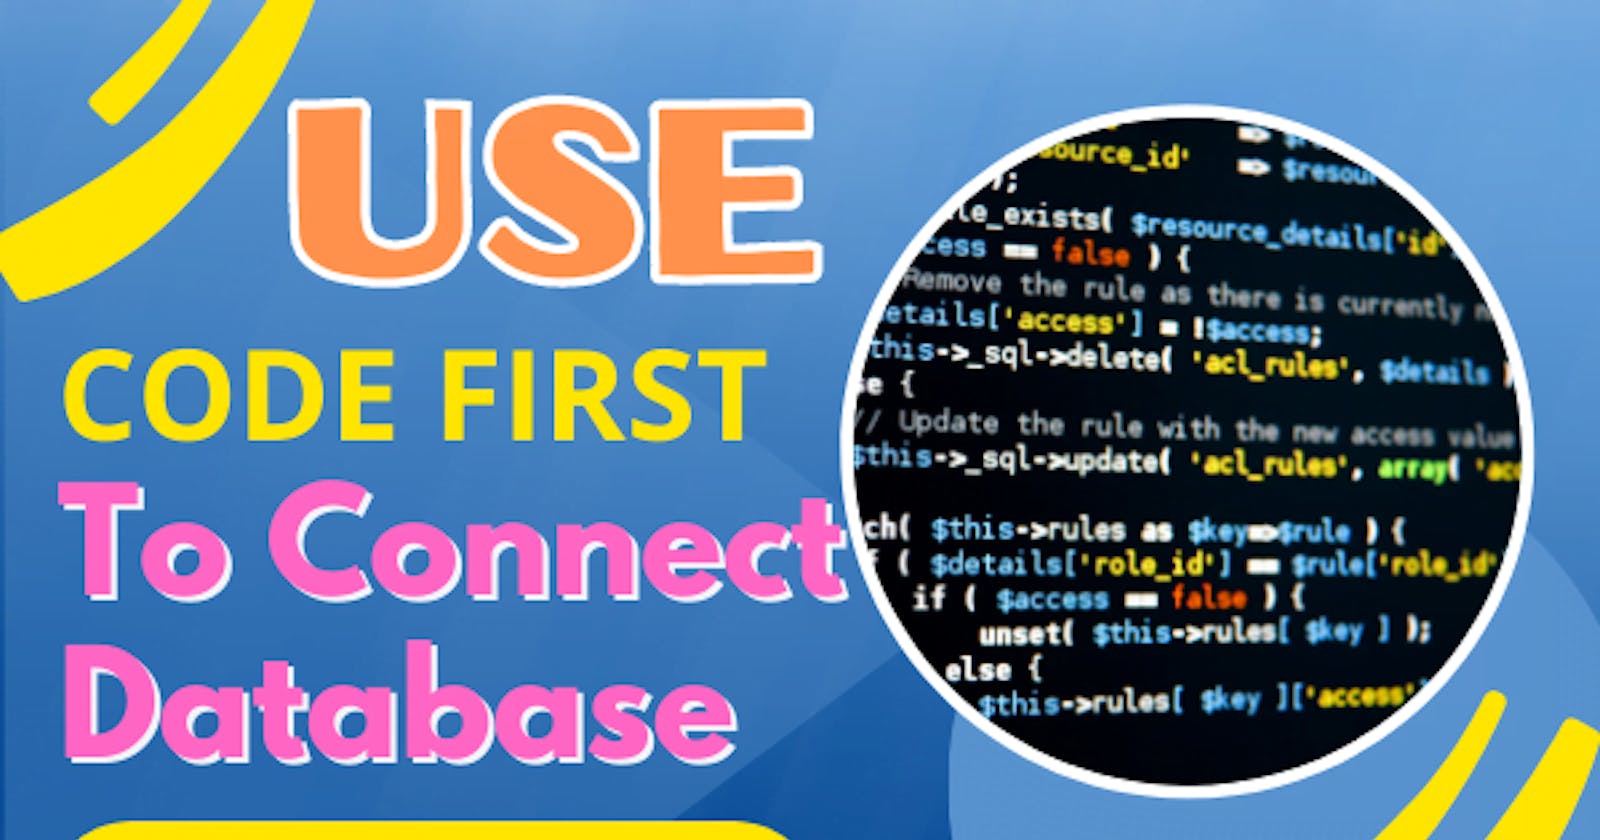 Use code first to connect database in .Net Core API